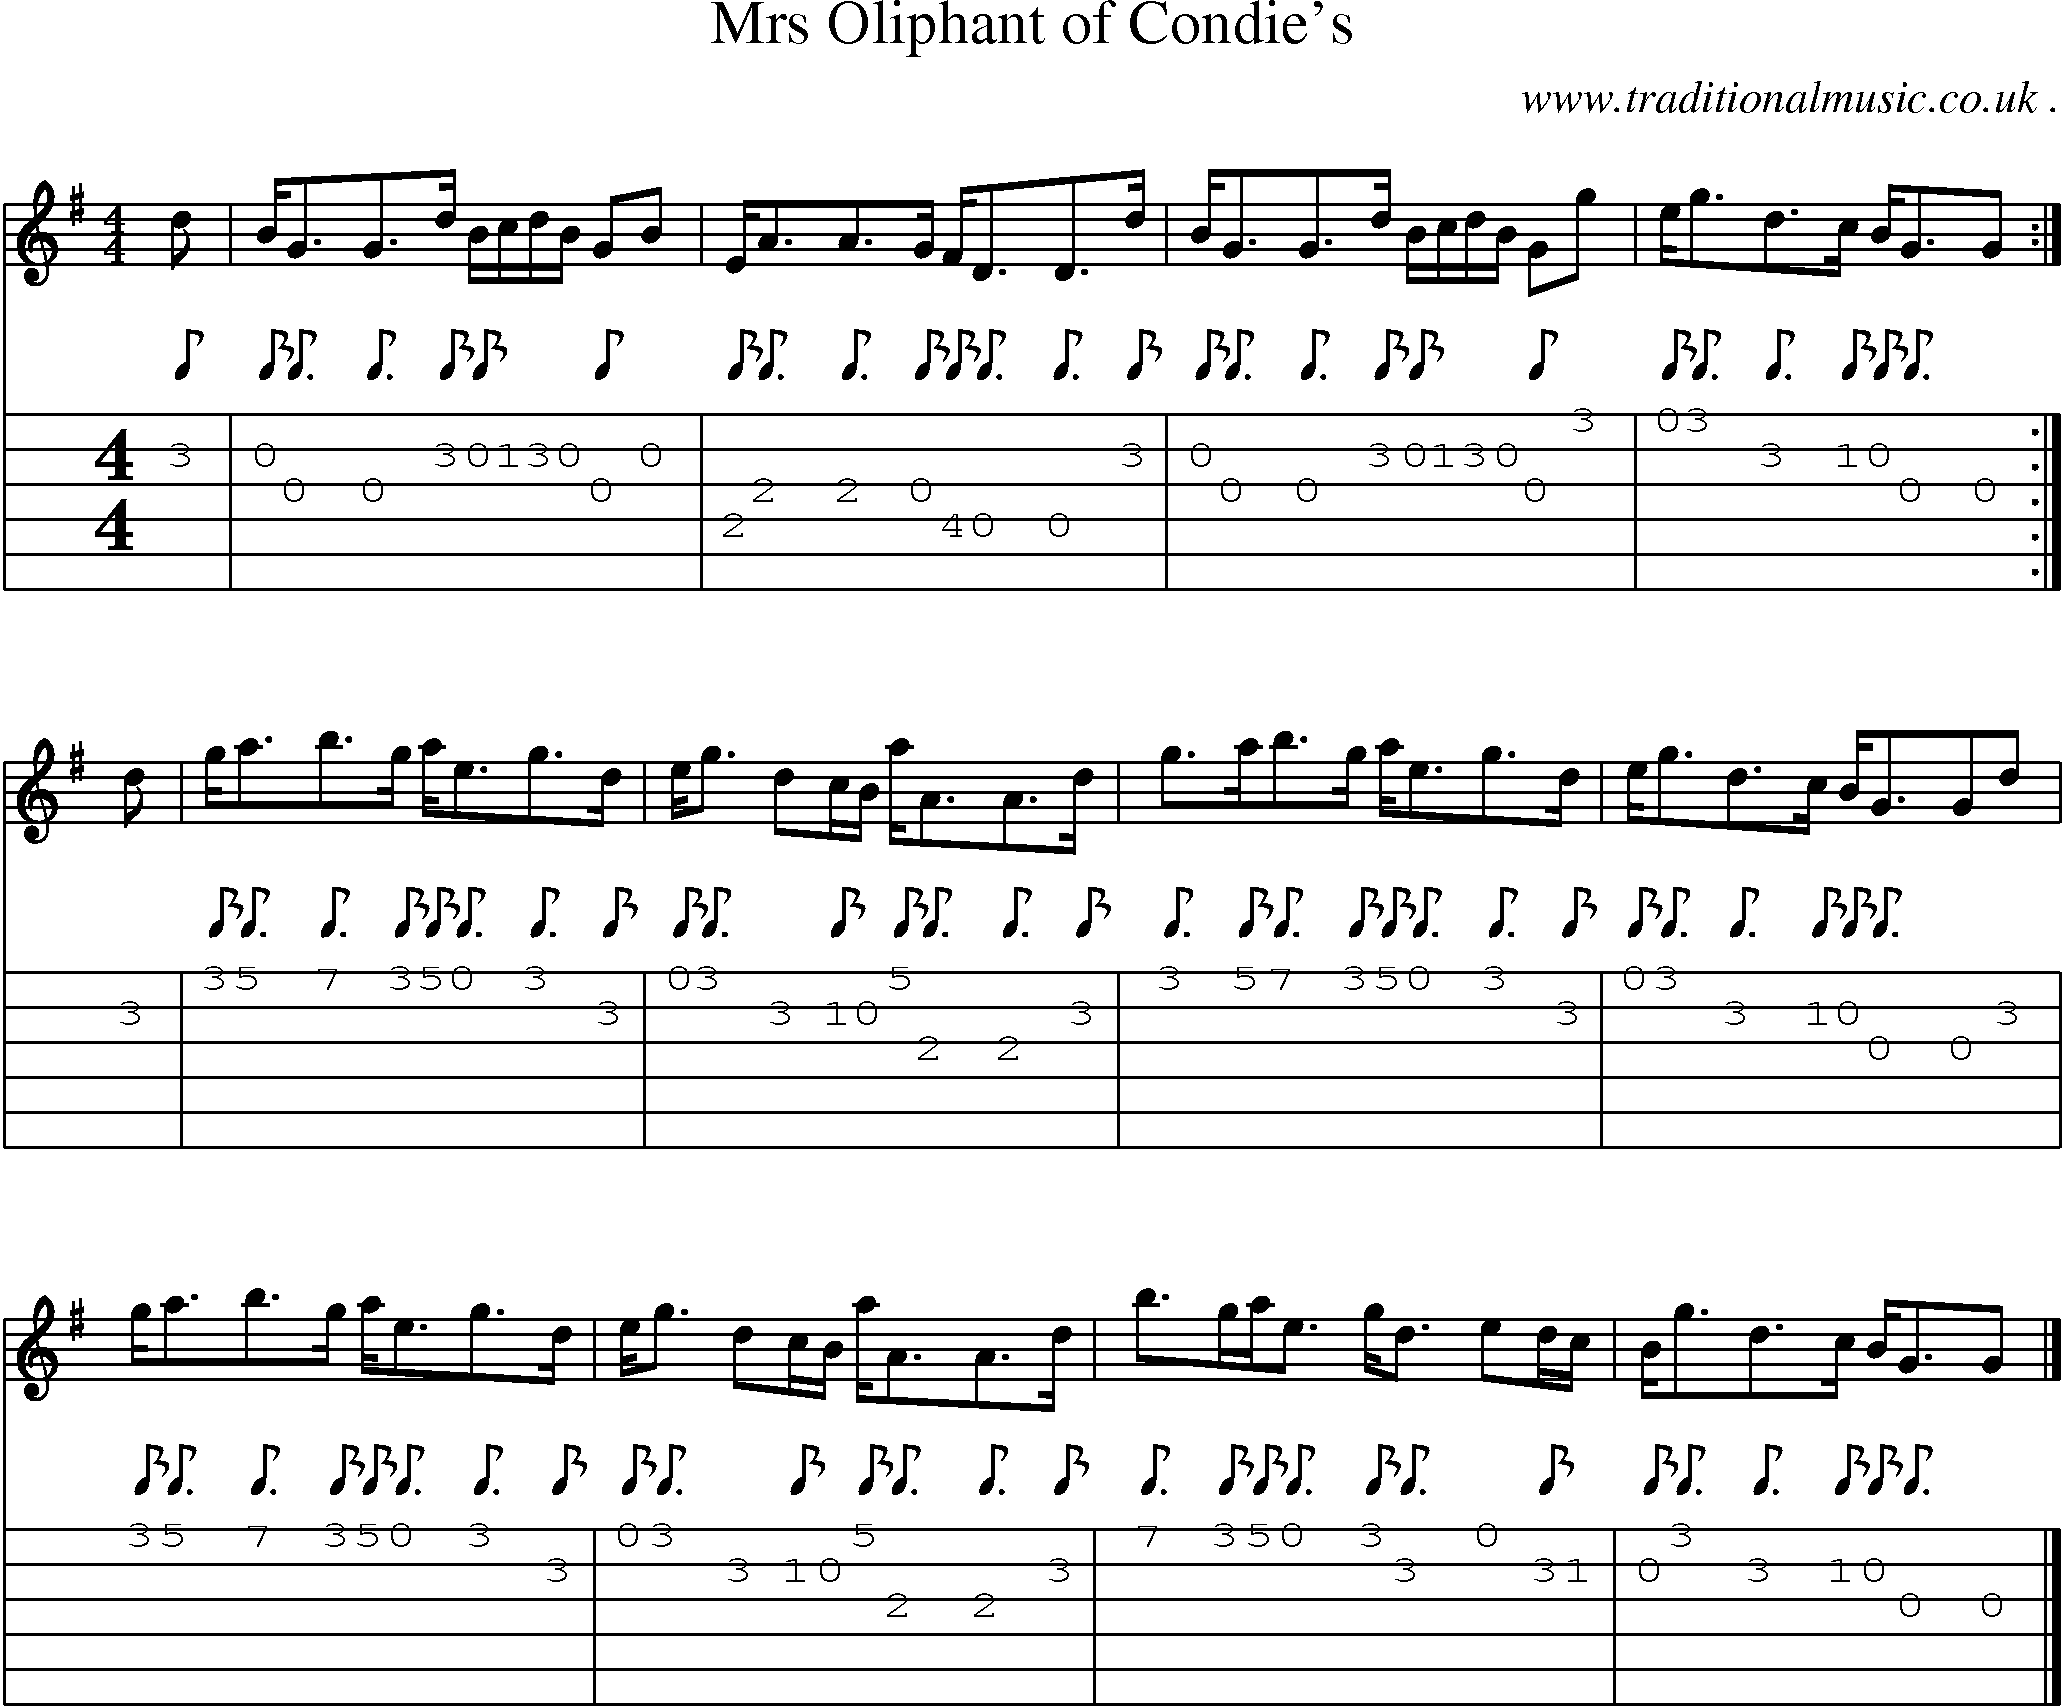 Sheet-music  score, Chords and Guitar Tabs for Mrs Oliphant Of Condies